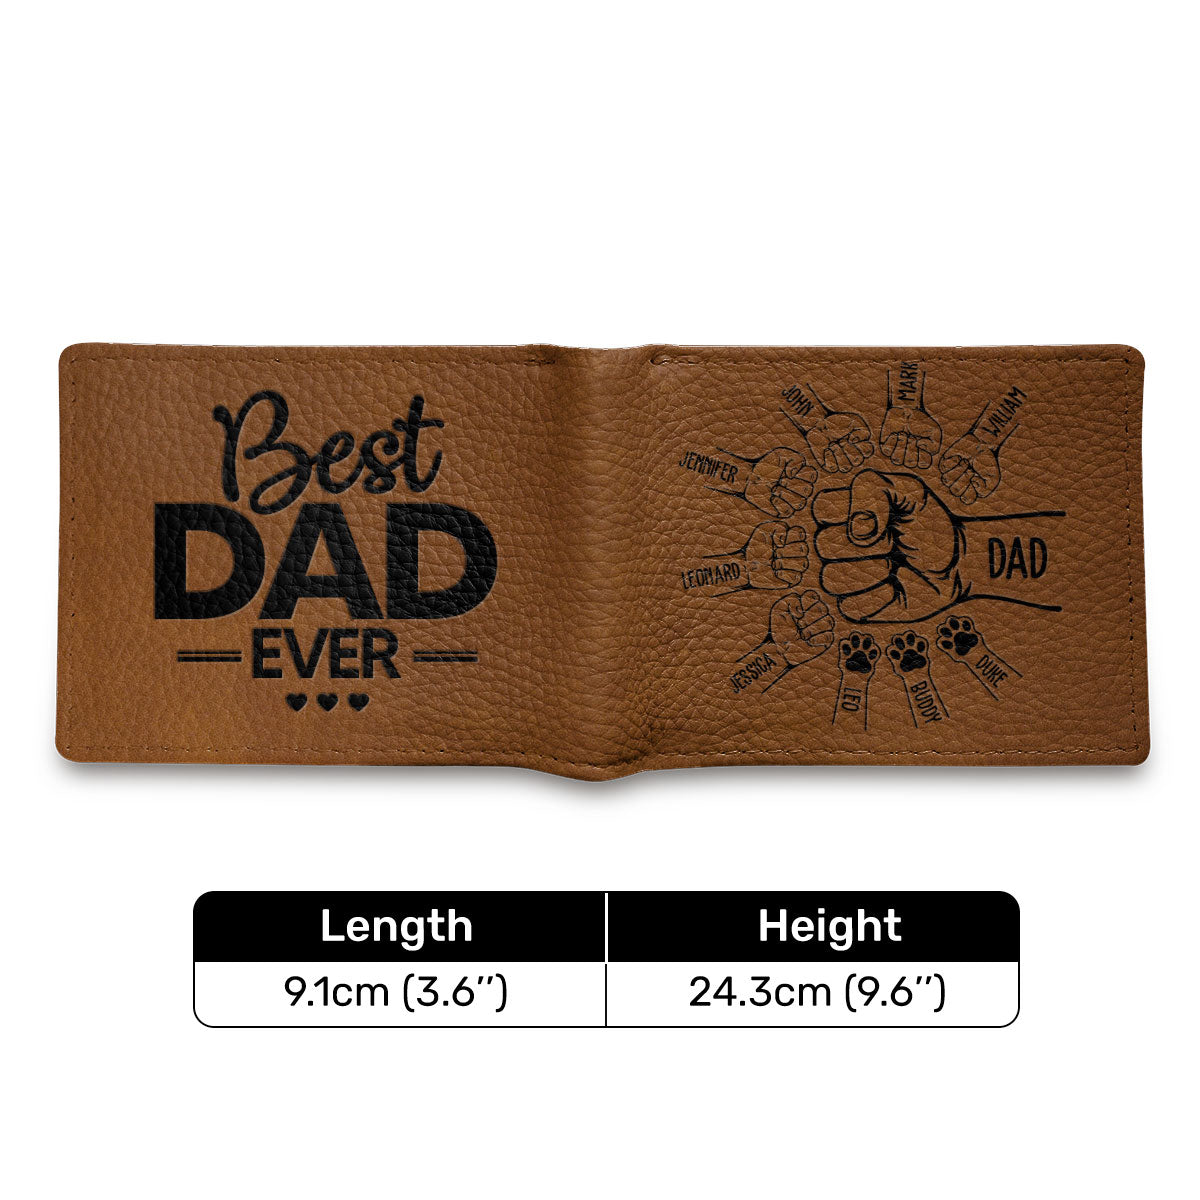 Best Dad Ever - Personalized Leather Folded Wallet SBLFWH860